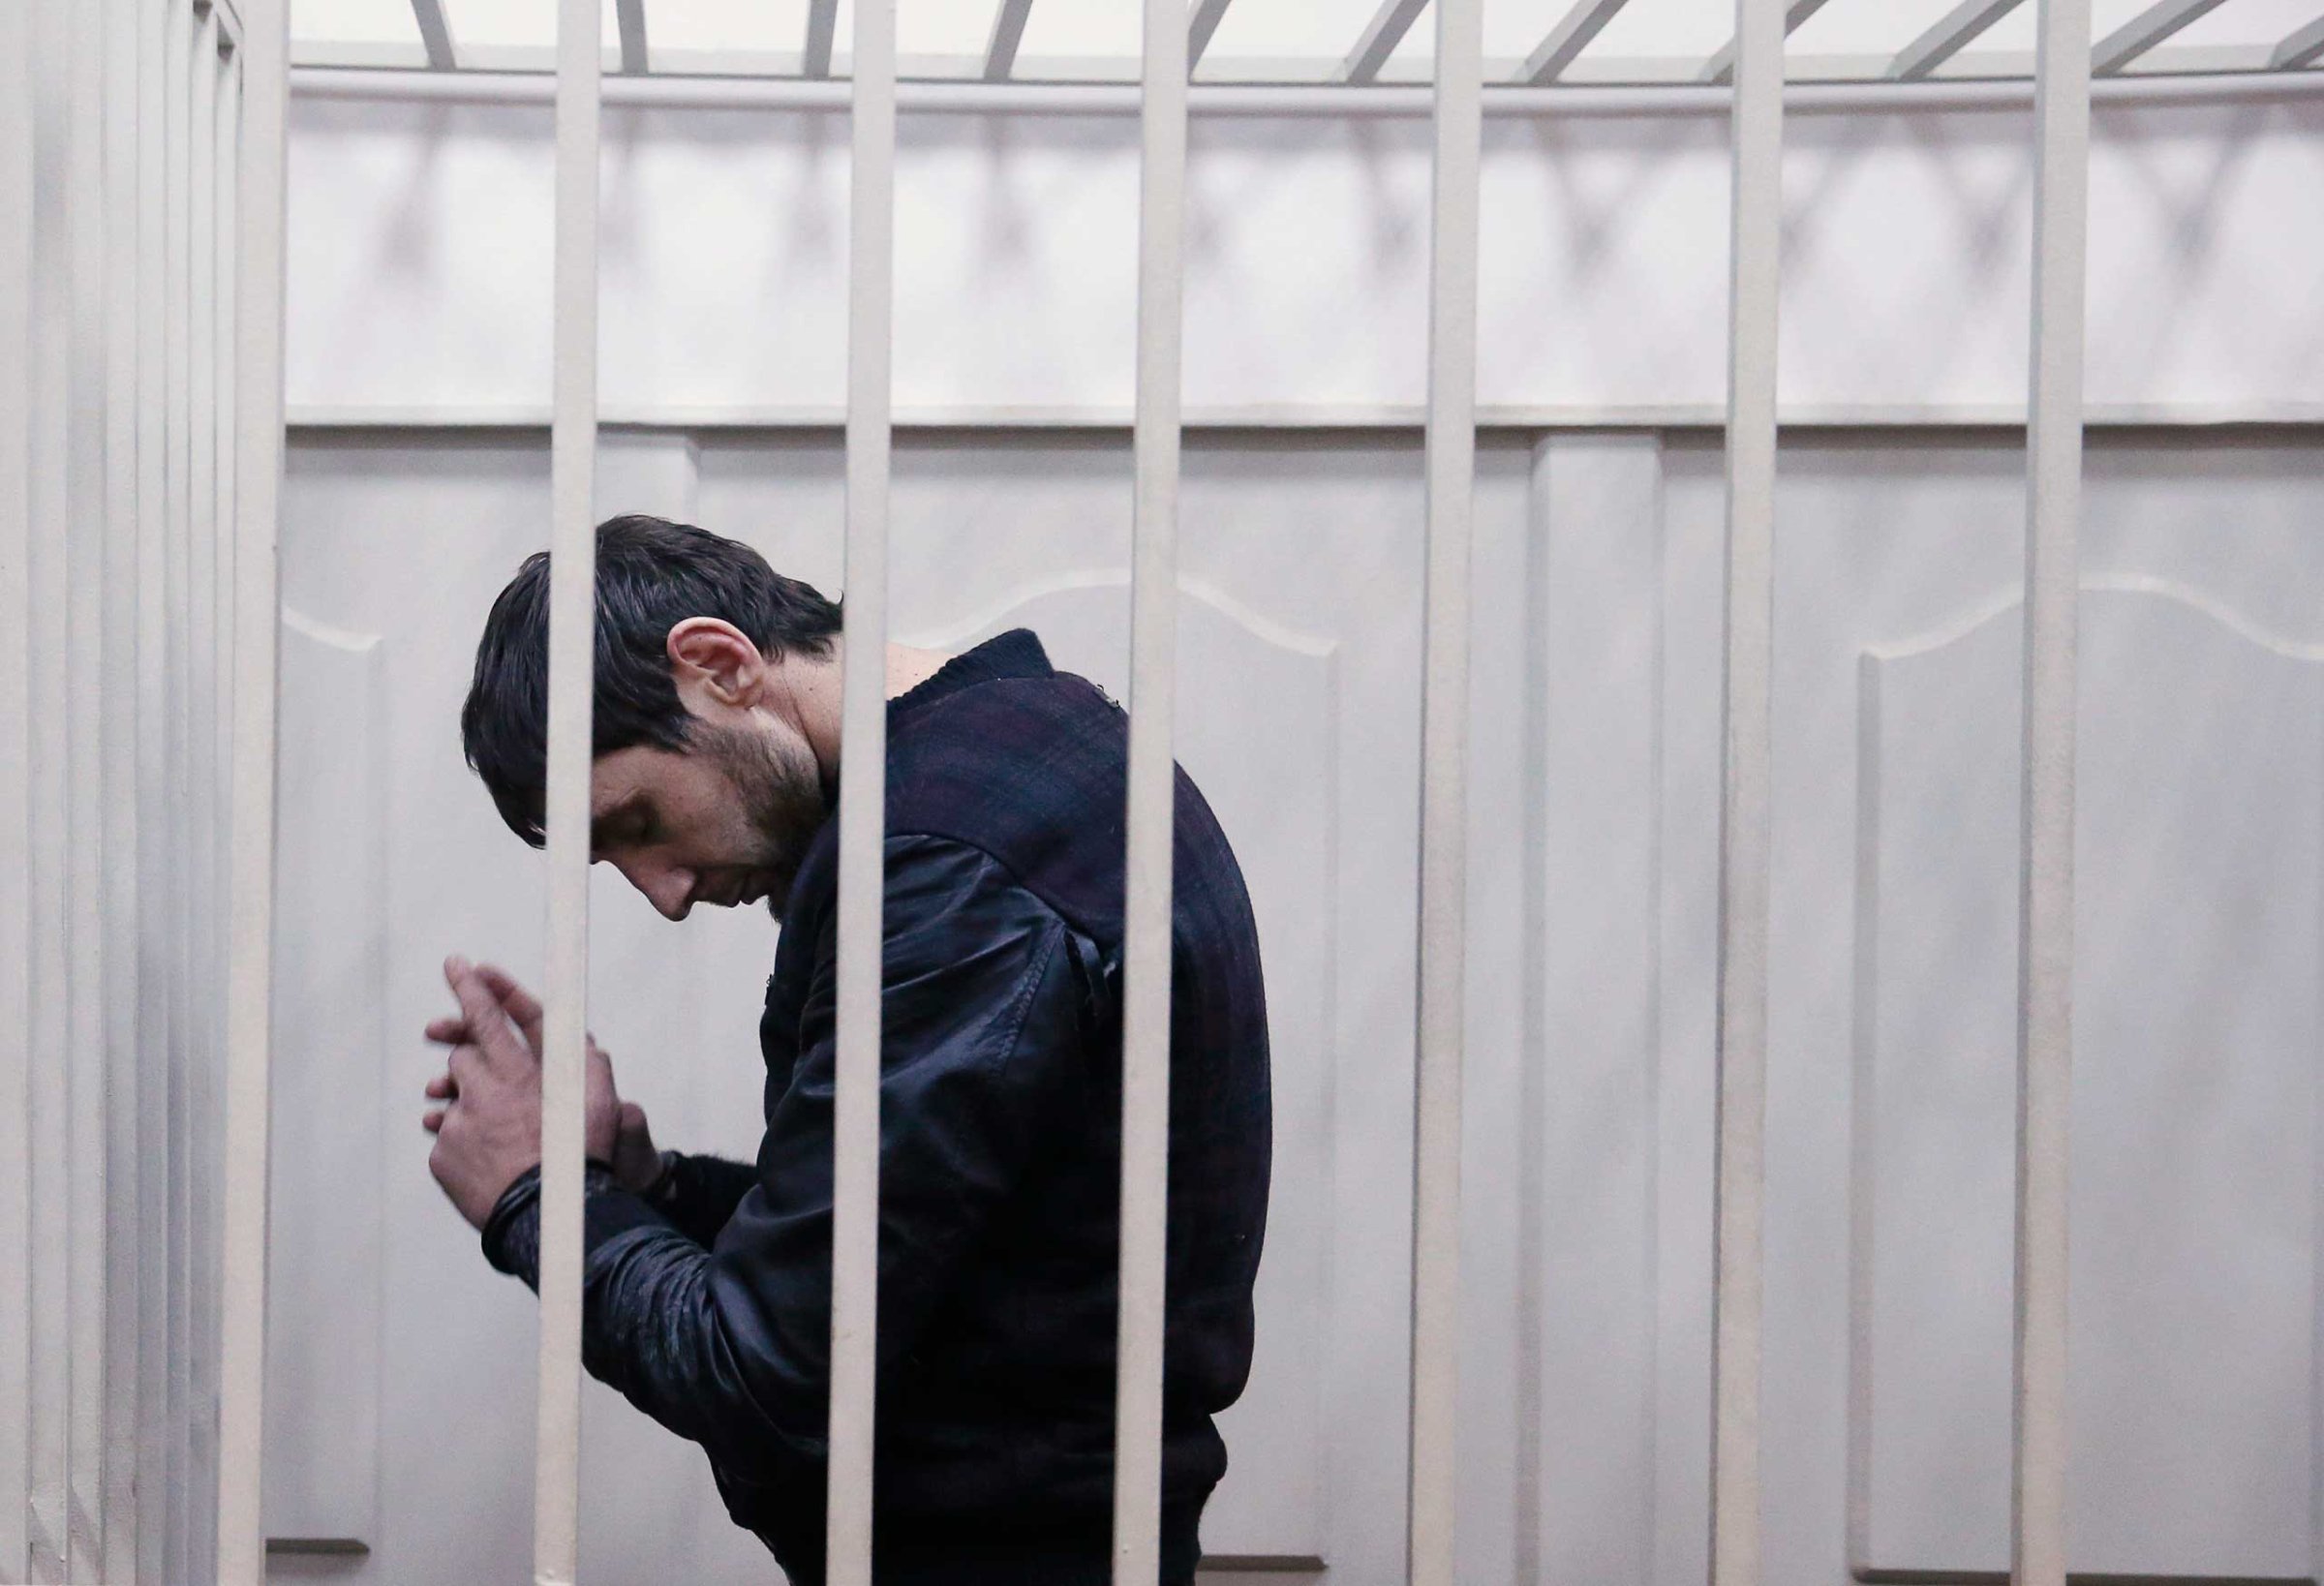 Zaur Dadayev, charged over the killing of Russian opposition figure Boris Nemtsov, stands inside a defendants' cage inside a court building in Moscow, March 8, 2015.